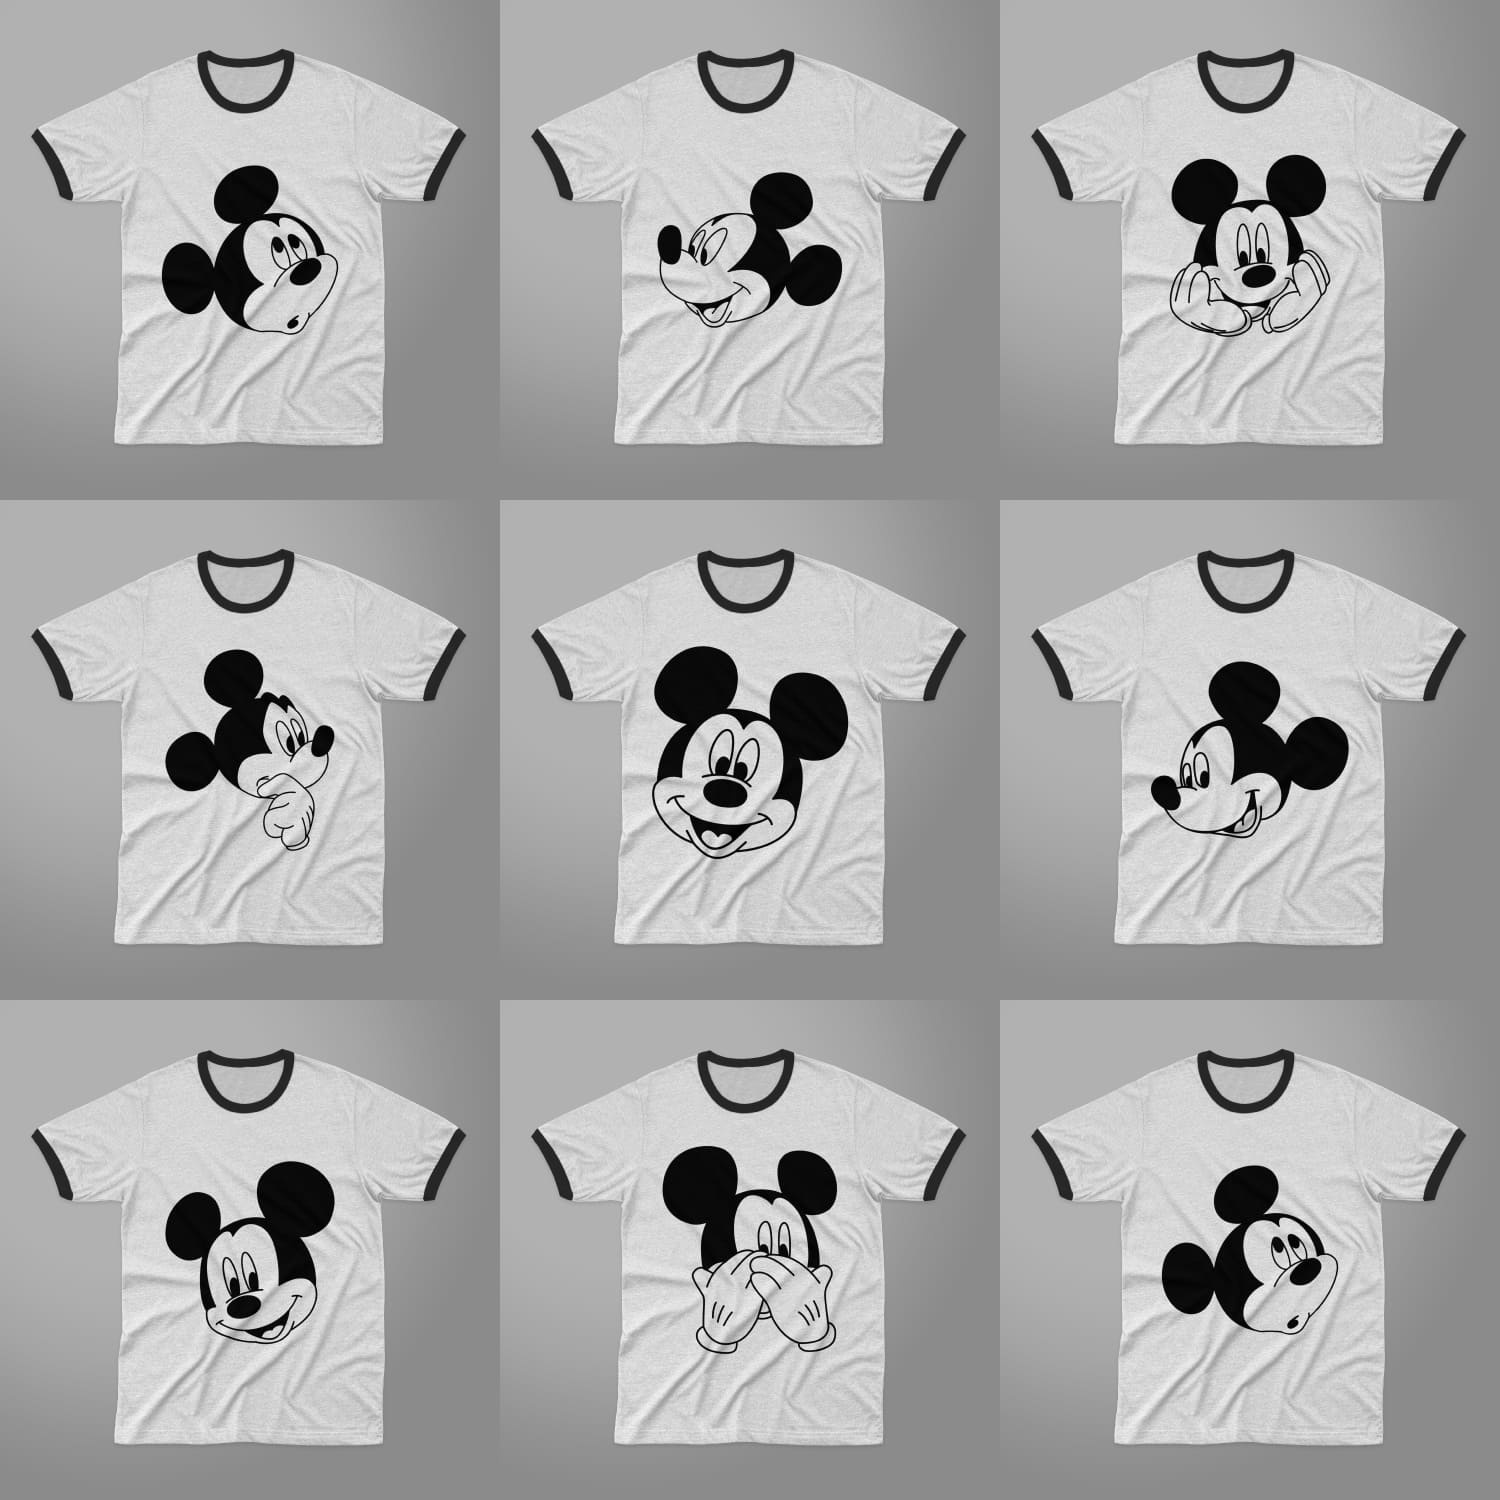 Mickey Mouse Face SVG T-shirt Designs created by DesignStudio.